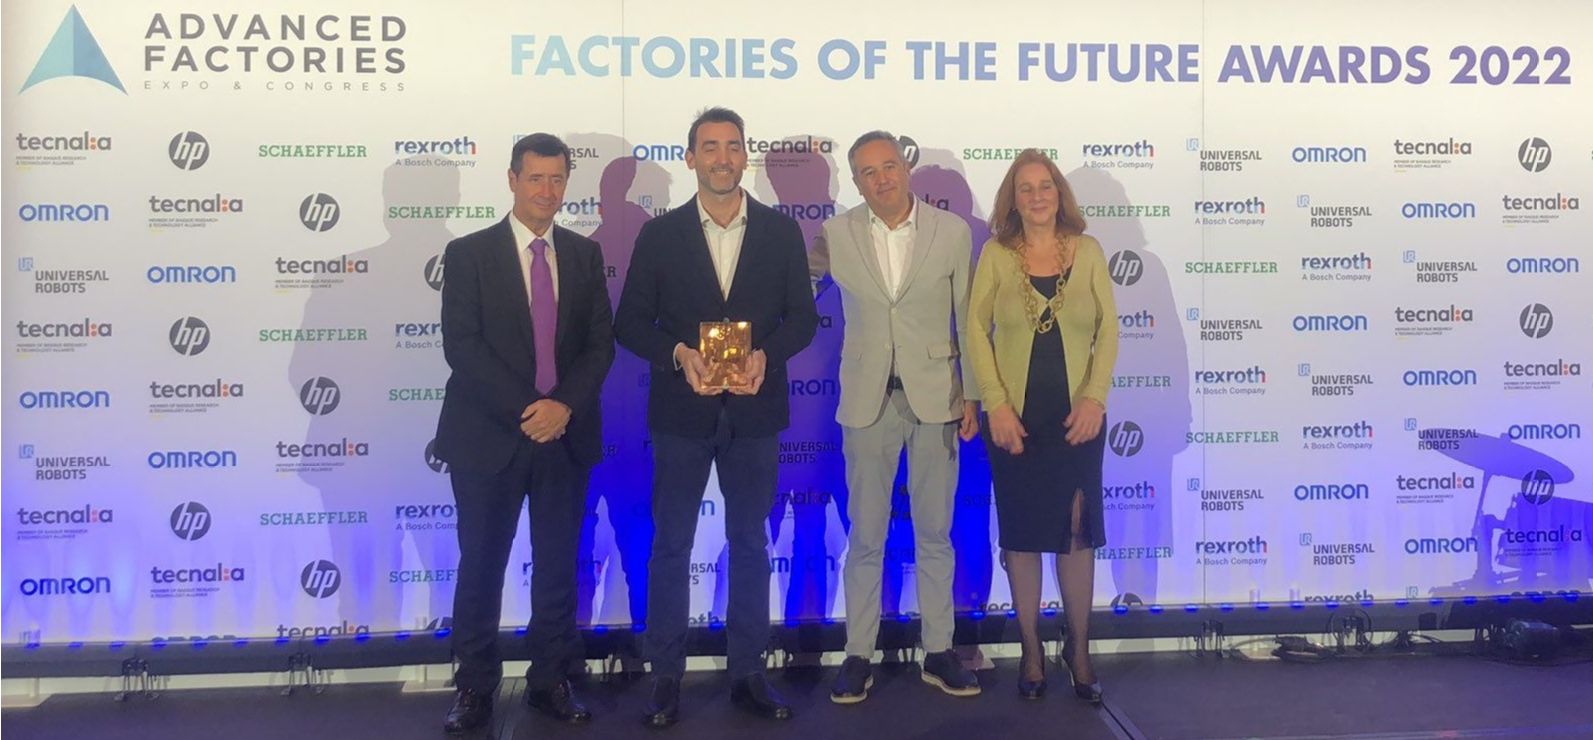 Fersa receives the award for the research and development of artificial intelligence applied to industrial plant